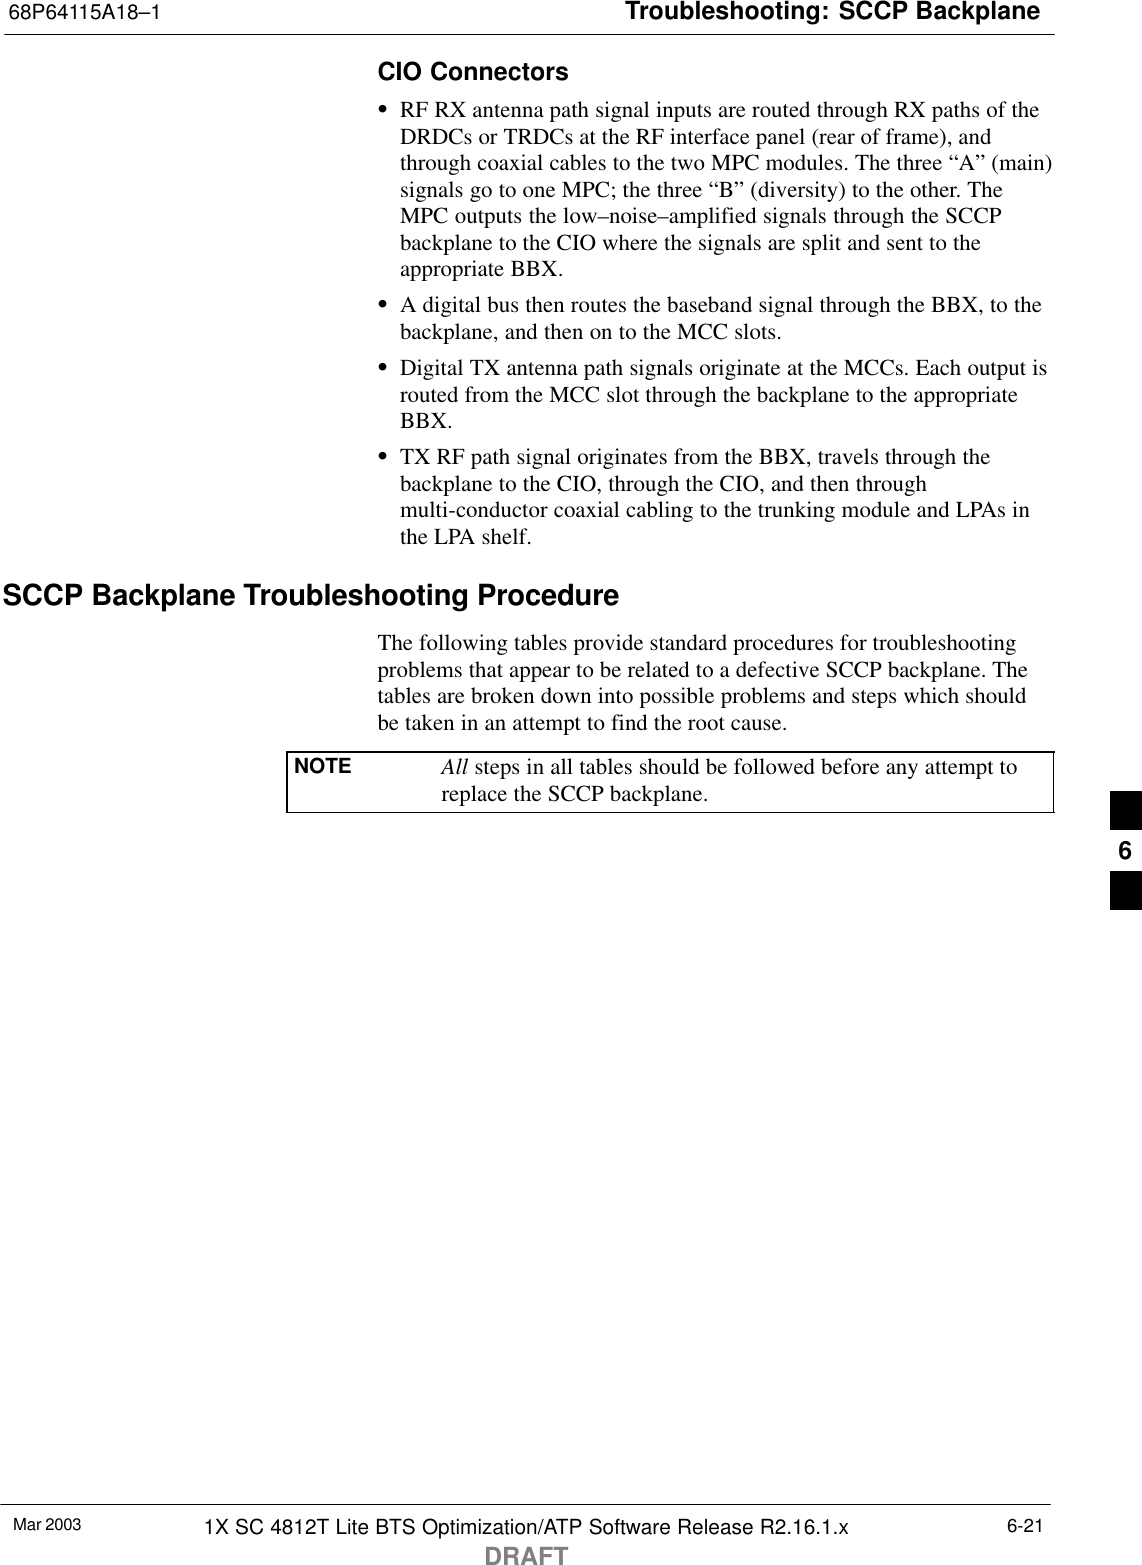 Troubleshooting: SCCP Backplane68P64115A18–1Mar 2003 1X SC 4812T Lite BTS Optimization/ATP Software Release R2.16.1.xDRAFT6-21CIO ConnectorsSRF RX antenna path signal inputs are routed through RX paths of theDRDCs or TRDCs at the RF interface panel (rear of frame), andthrough coaxial cables to the two MPC modules. The three “A” (main)signals go to one MPC; the three “B” (diversity) to the other. TheMPC outputs the low–noise–amplified signals through the SCCPbackplane to the CIO where the signals are split and sent to theappropriate BBX.SA digital bus then routes the baseband signal through the BBX, to thebackplane, and then on to the MCC slots.SDigital TX antenna path signals originate at the MCCs. Each output isrouted from the MCC slot through the backplane to the appropriateBBX.STX RF path signal originates from the BBX, travels through thebackplane to the CIO, through the CIO, and then throughmulti-conductor coaxial cabling to the trunking module and LPAs inthe LPA shelf.SCCP Backplane Troubleshooting ProcedureThe following tables provide standard procedures for troubleshootingproblems that appear to be related to a defective SCCP backplane. Thetables are broken down into possible problems and steps which shouldbe taken in an attempt to find the root cause.NOTE All steps in all tables should be followed before any attempt toreplace the SCCP backplane.6